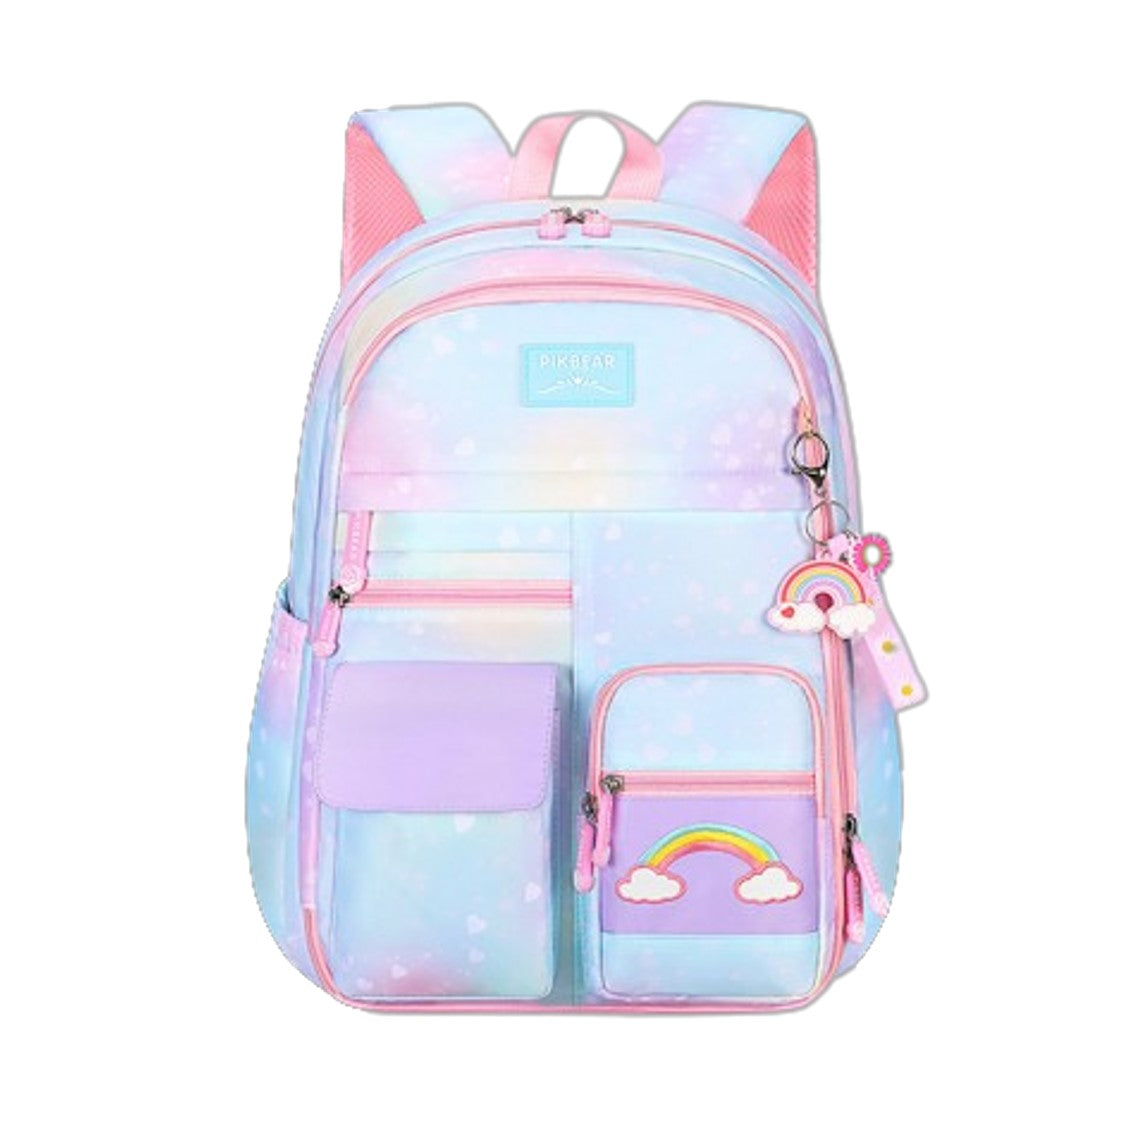 Latest Girls bags ||Girls college bags || Girls school bags || Girls  Tuition bags ||